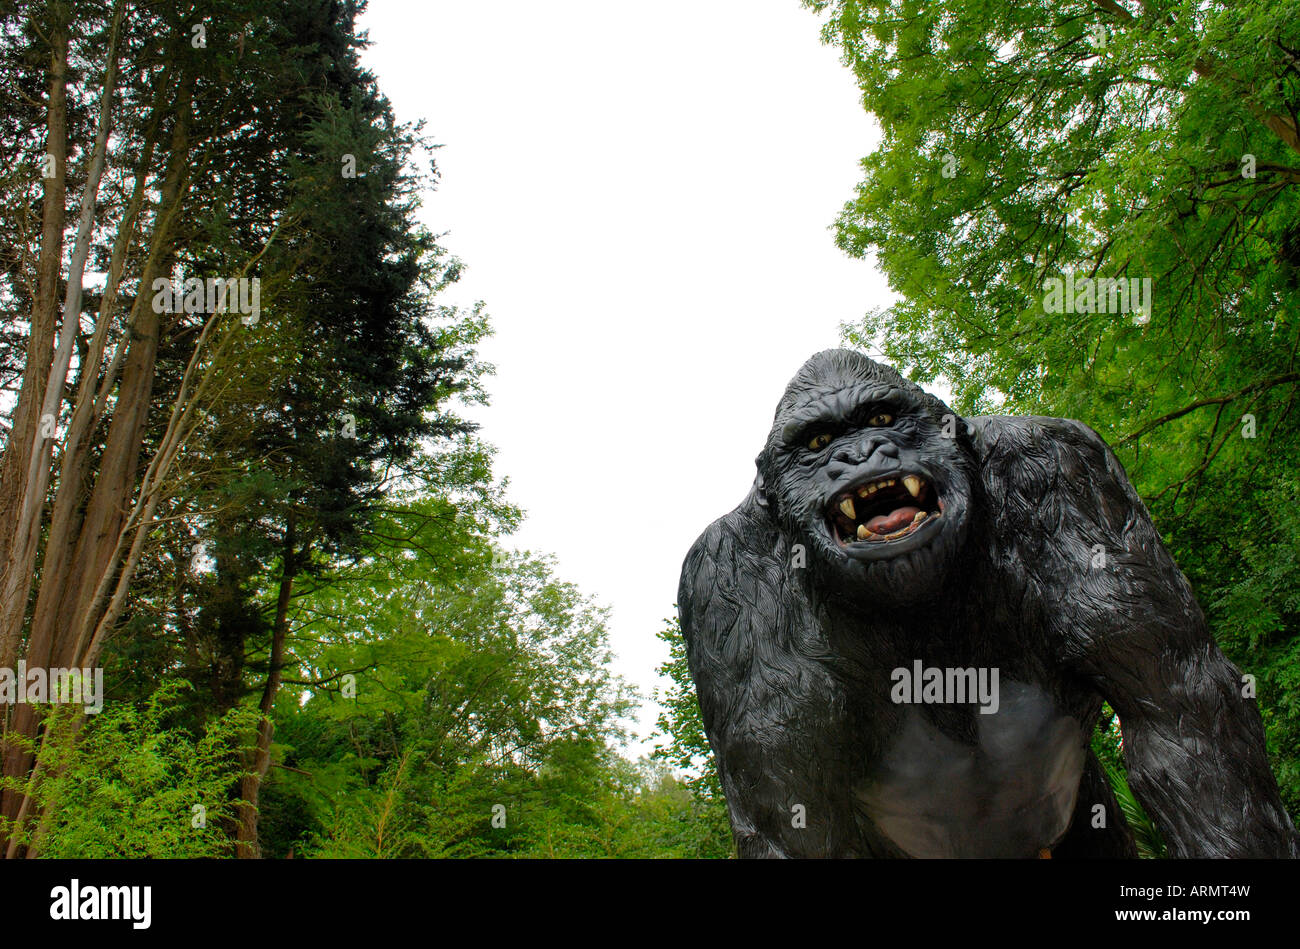 Giant Model of a Gorilla at Wookey Hole Caves Mendip Hills Wells ...